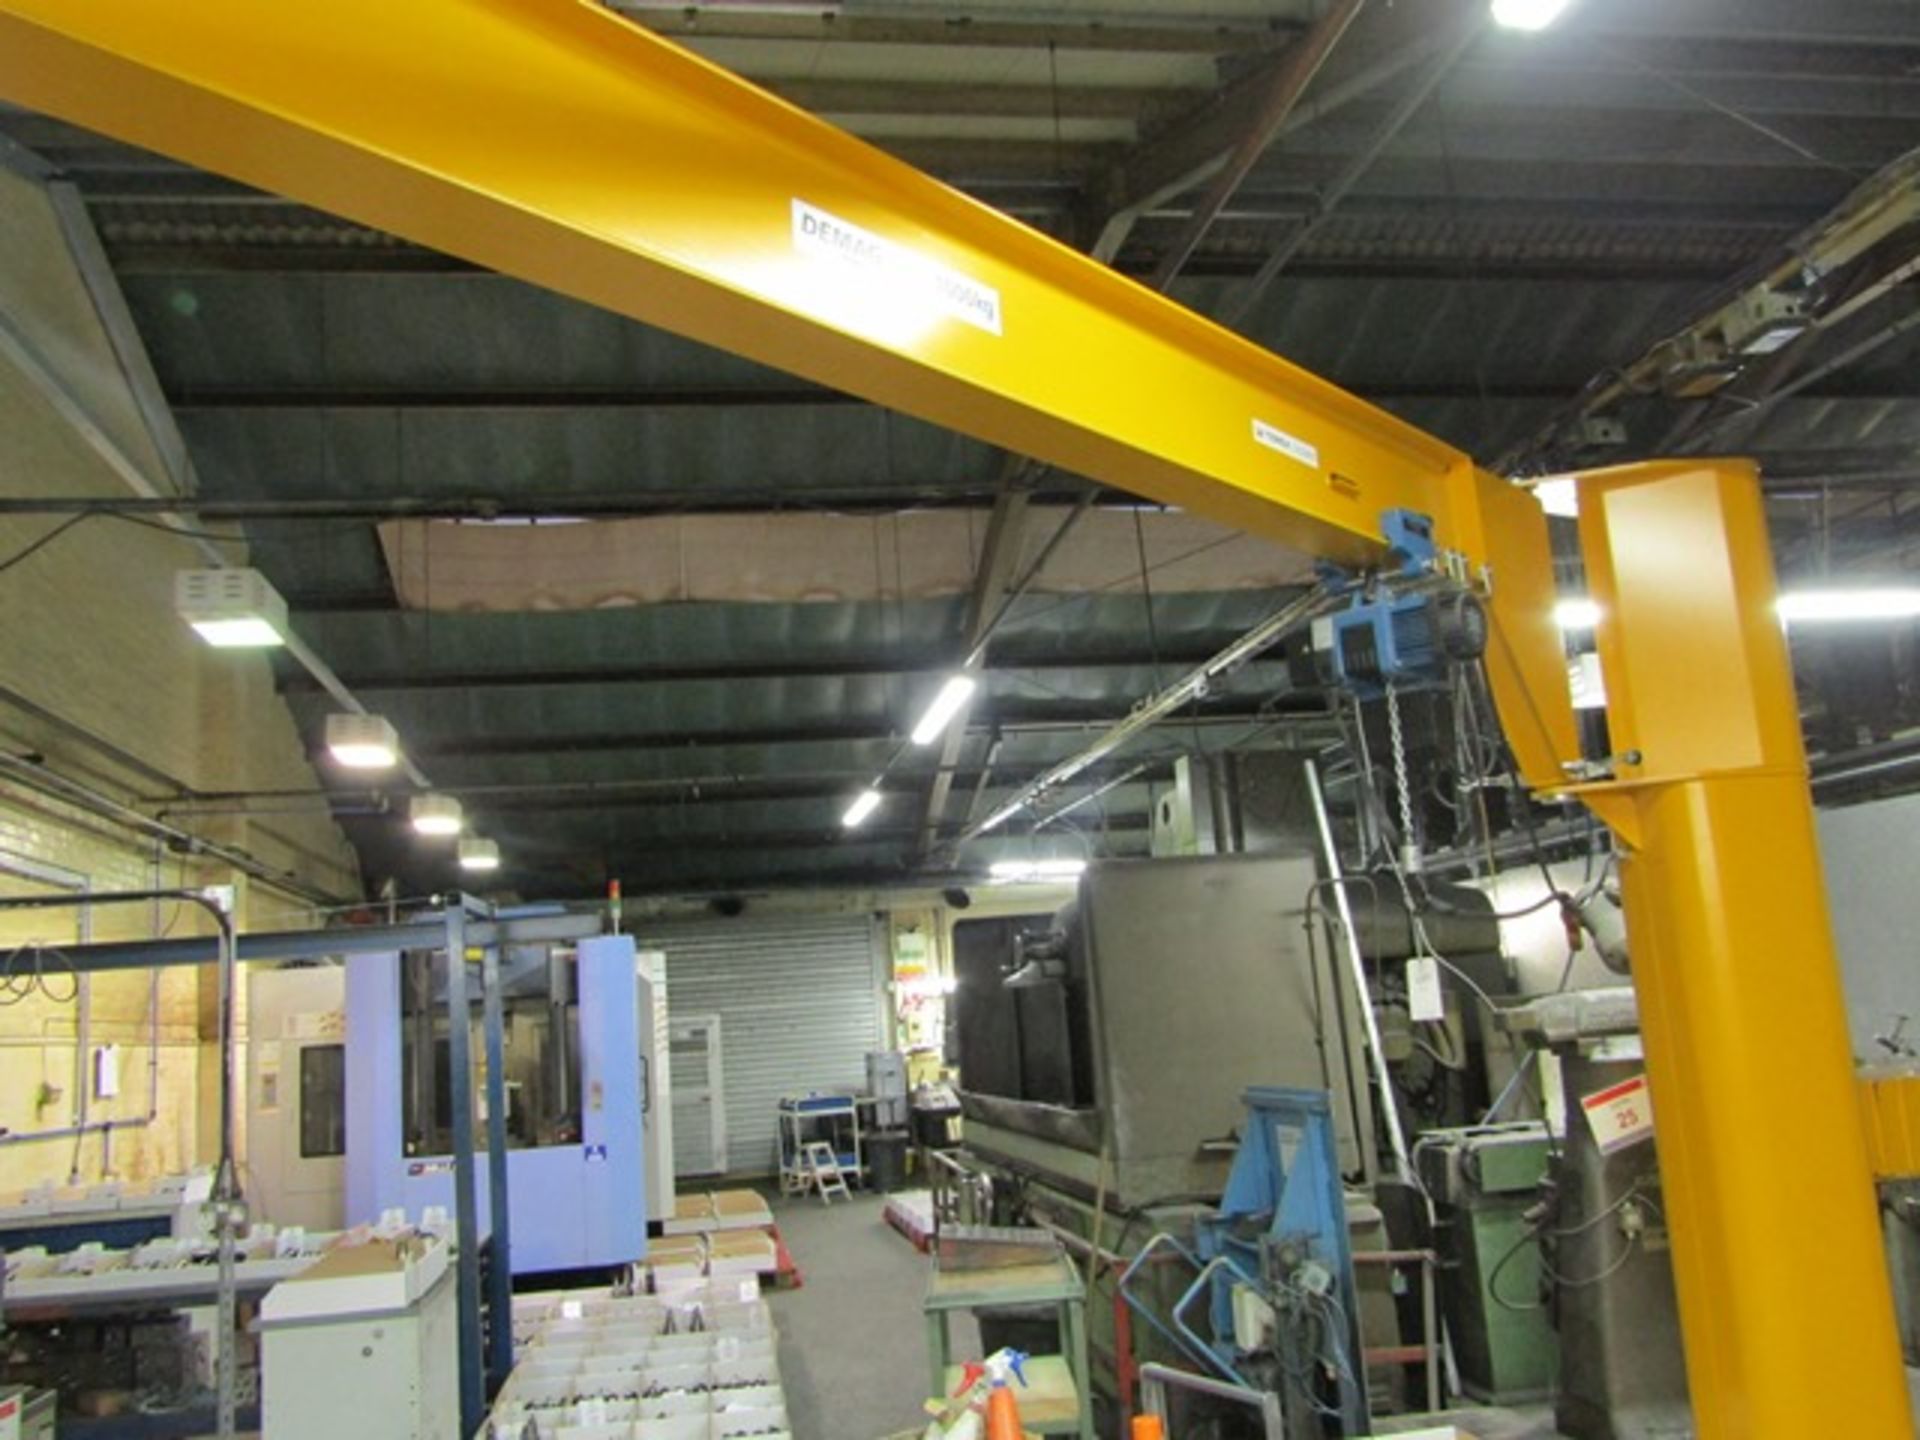 Demag 1000kg heavy duty pillar jib arm crane, approx swing 6m, fitted Demag 1000kg, electric chain - Image 3 of 5